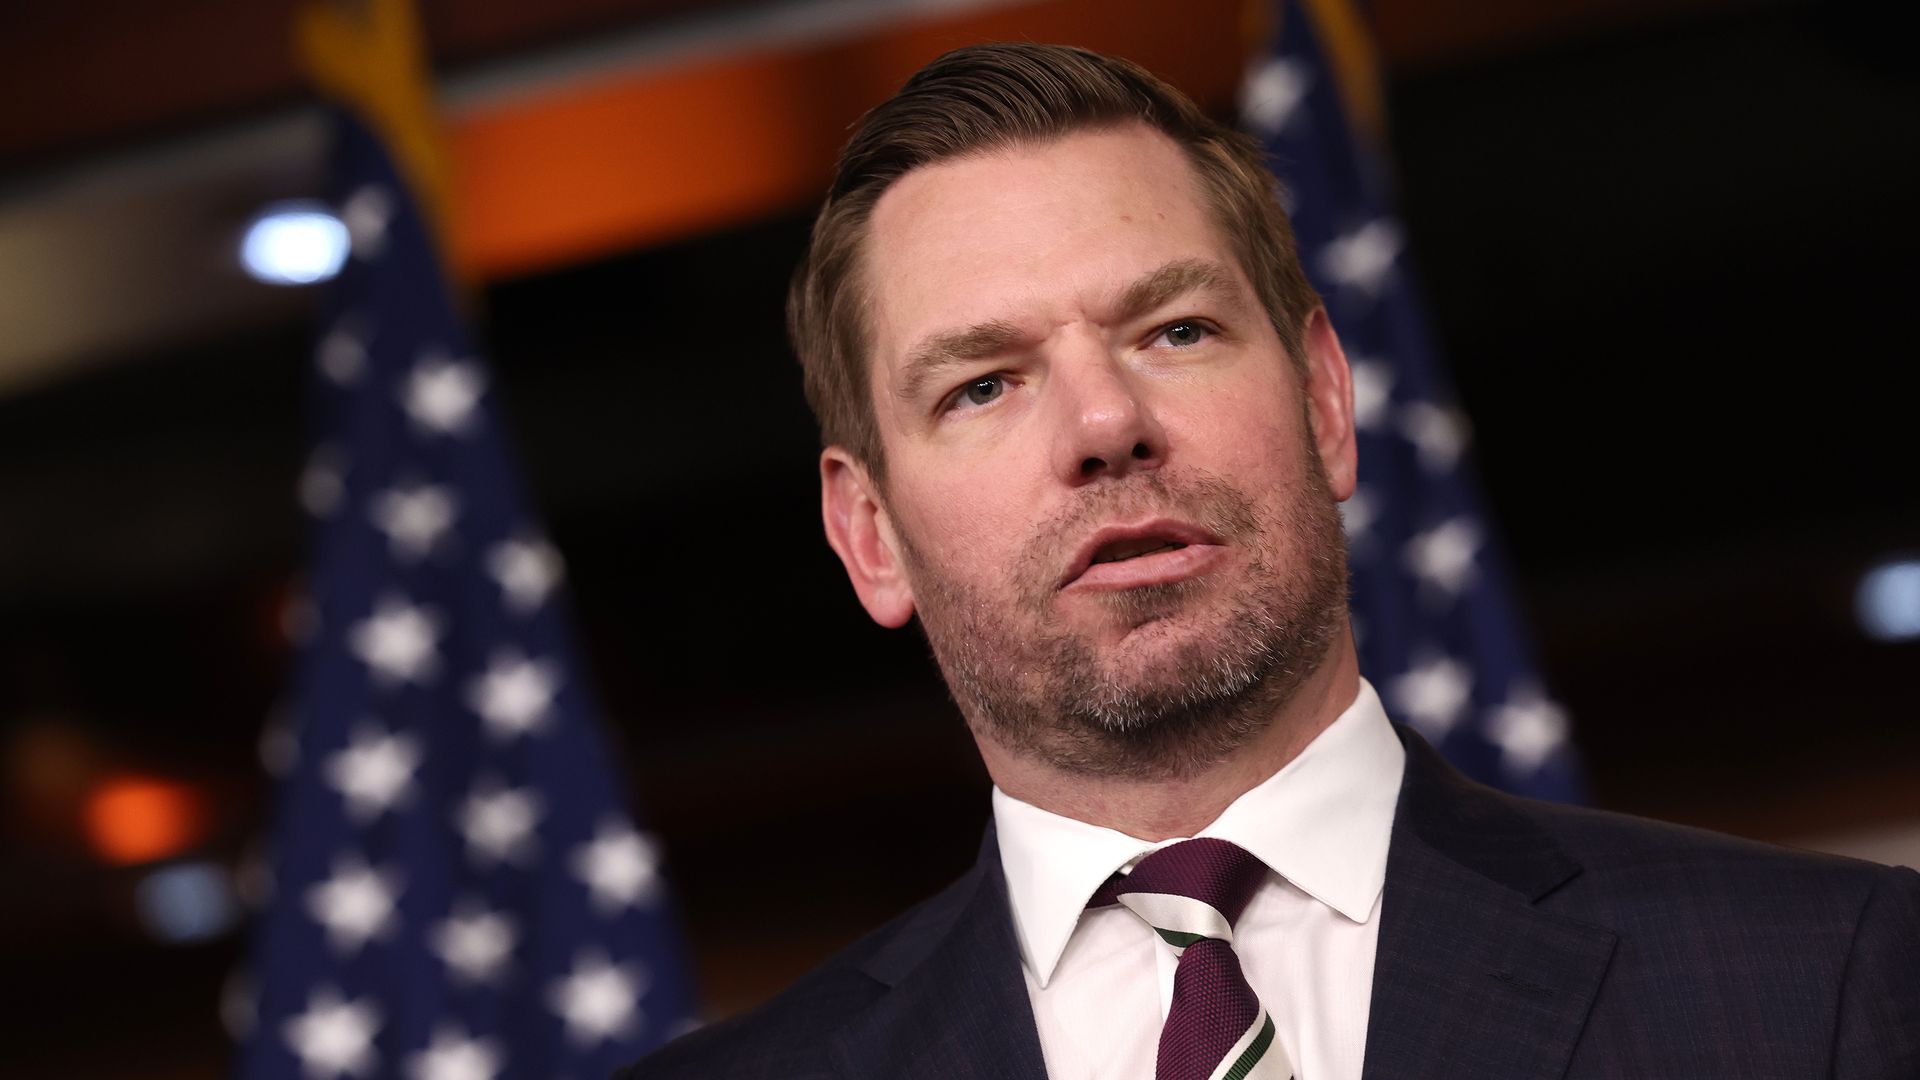  Eric Swalwell (D-CA) speaks at a press conference on committee assignments for the 118th U.S. Congress, at the U.S. Capitol Building on January 25, 2023 in Washington, DC. 